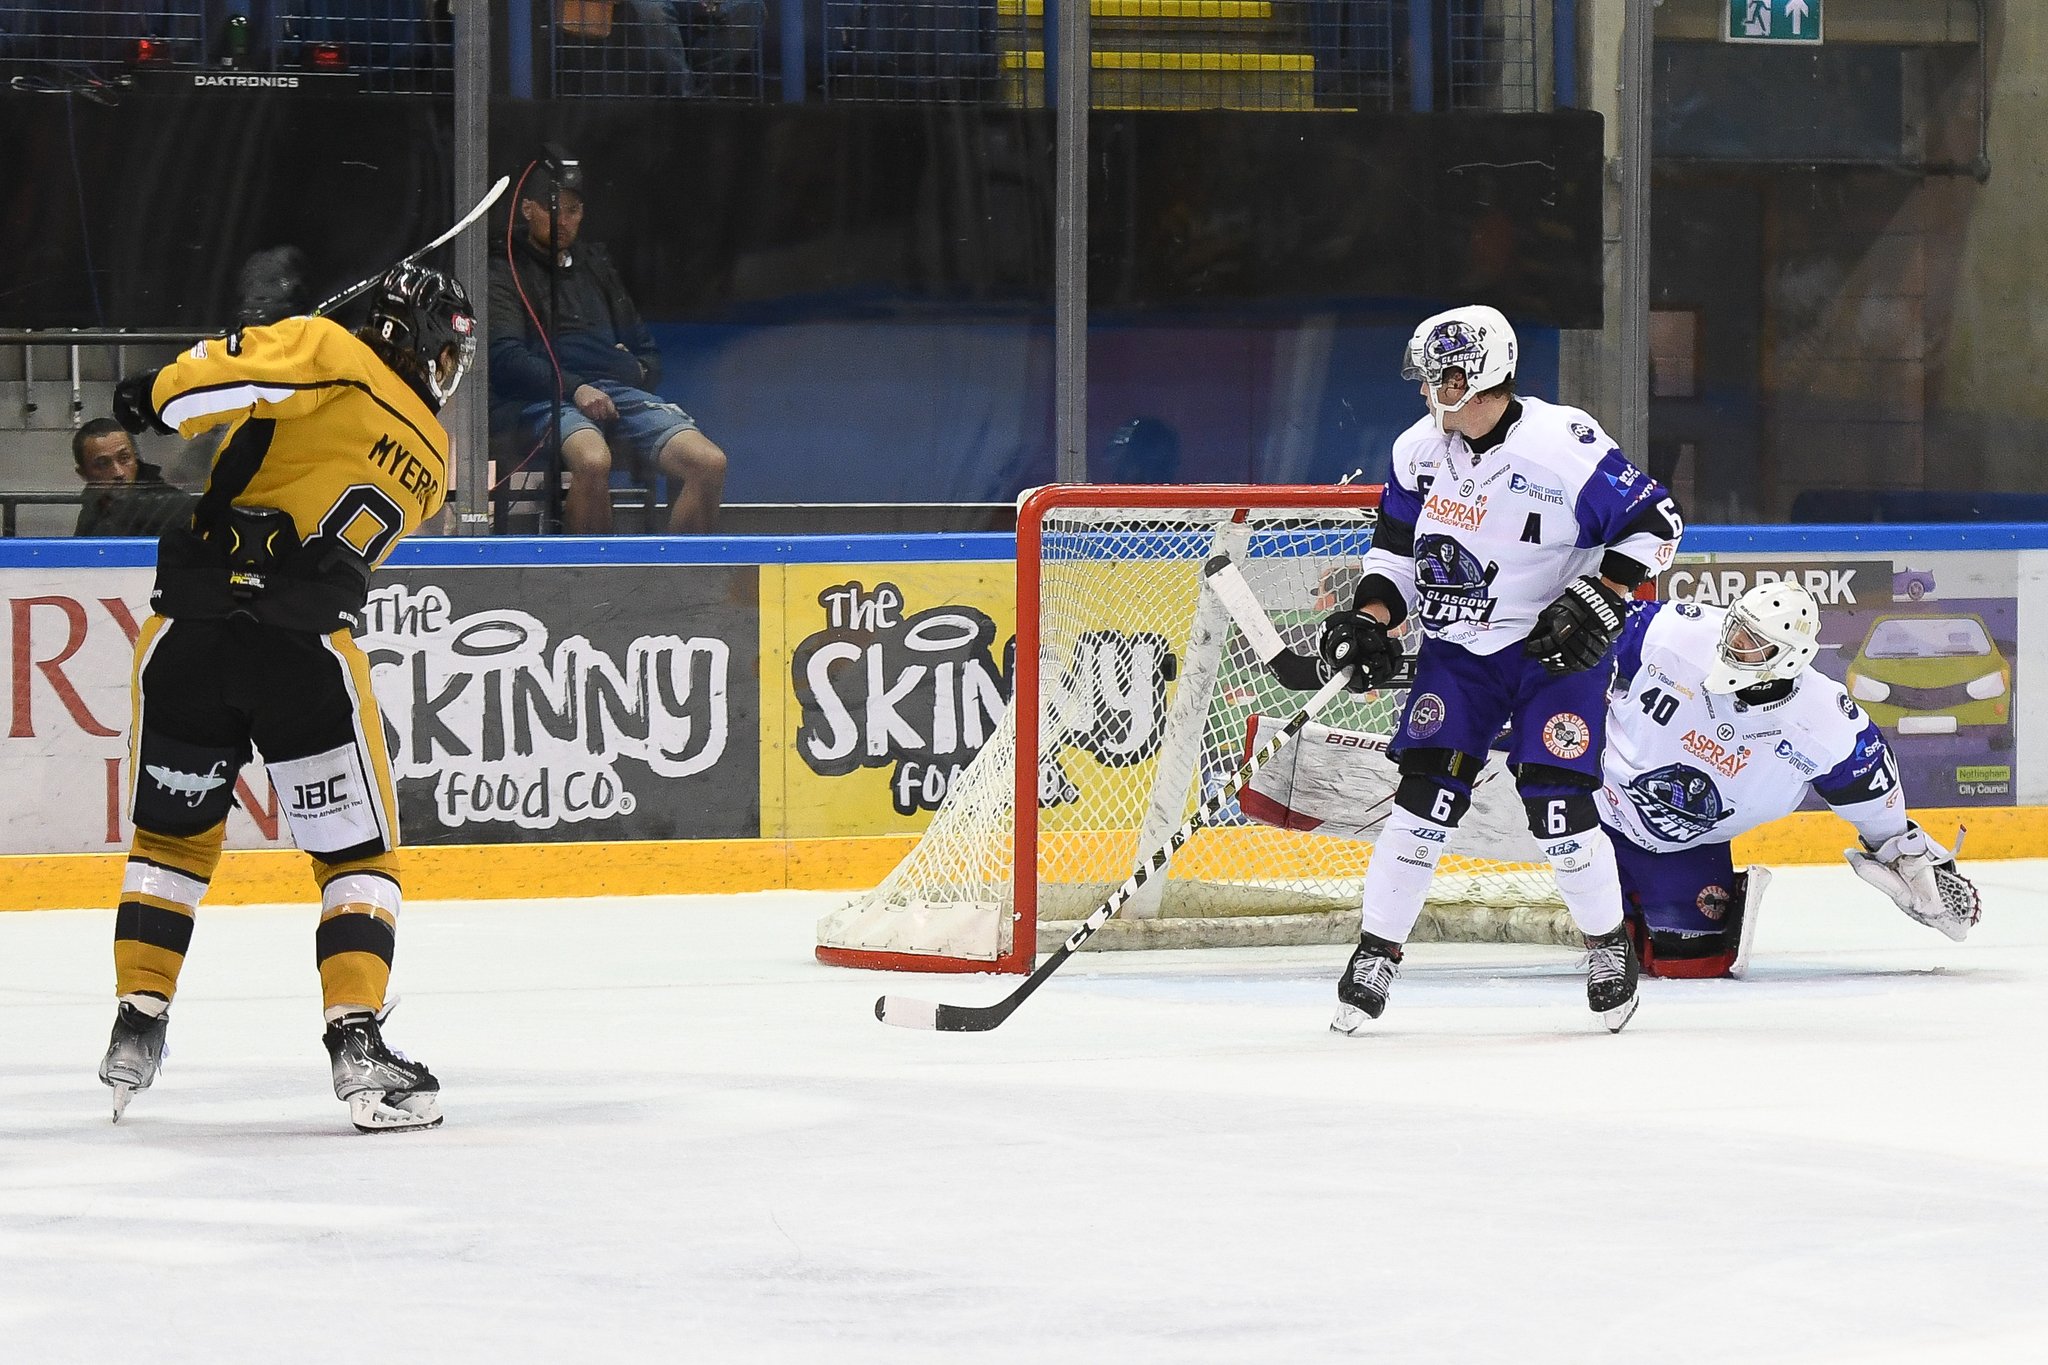 PANTHERS TURN ATTENTIONS TO CLAN ON FRIDAY Top Image